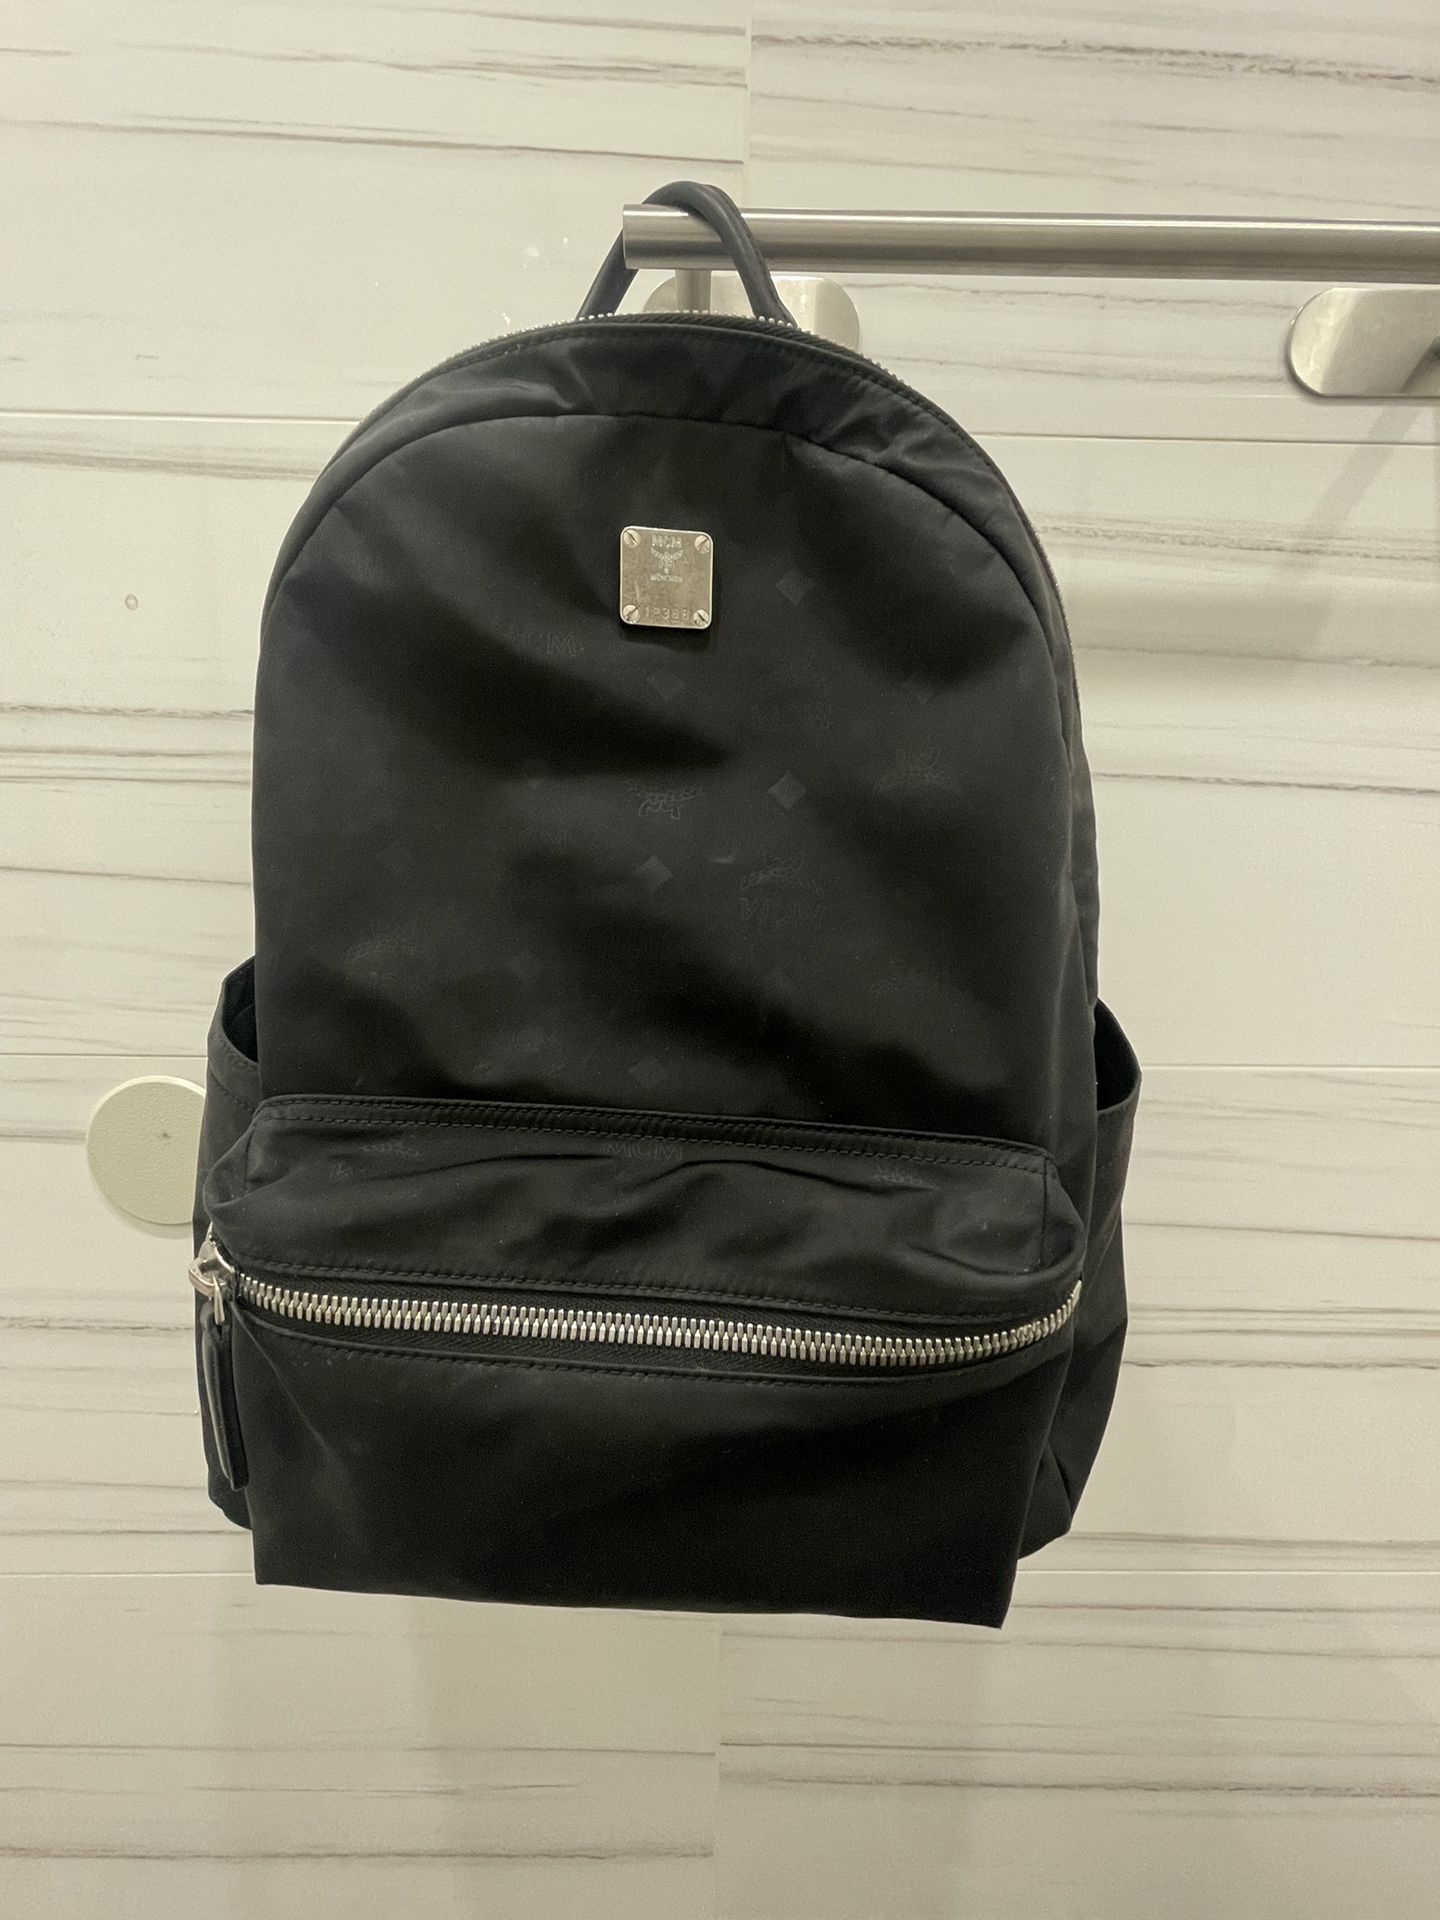 Mcm Bag for Sale in Bronx, NY - OfferUp